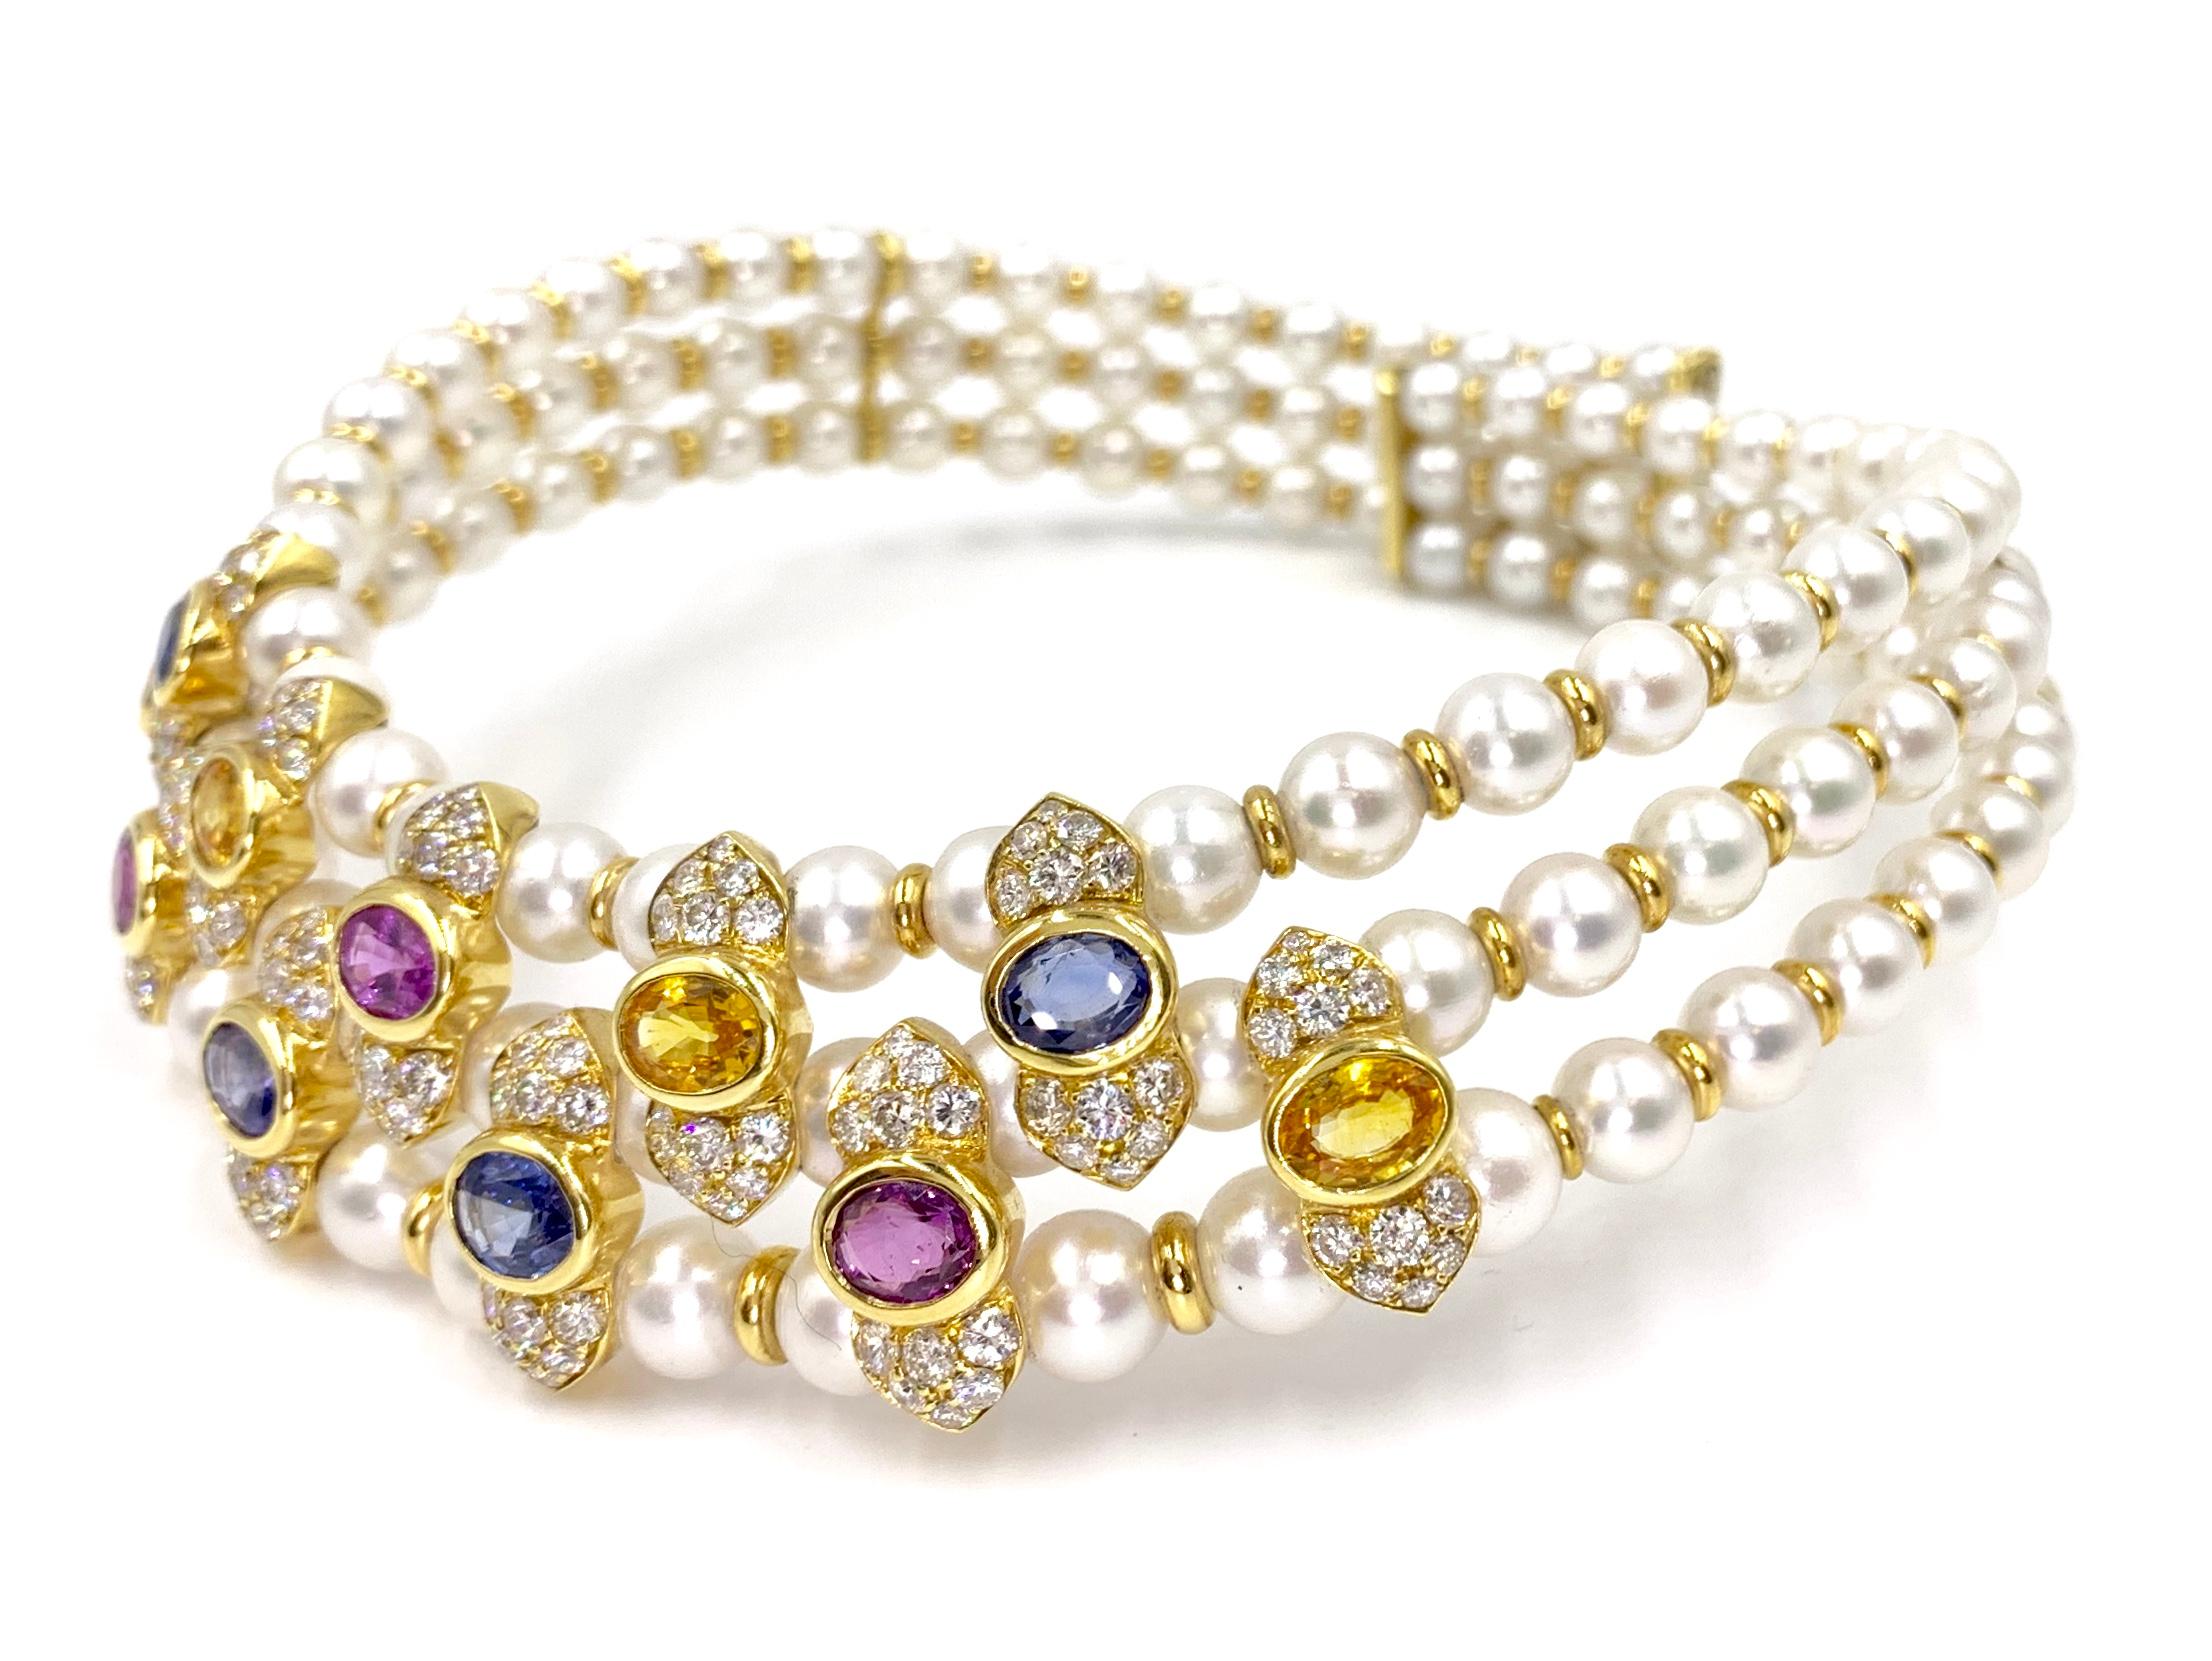 Exceptionally well-made flexible 18 karat yellow gold Victorian inspired choker necklace featuring three rows of lustrous graduated natural pearls, four oval blue sapphires, three oval pink sapphires, four yellow sapphires and white round diamonds.